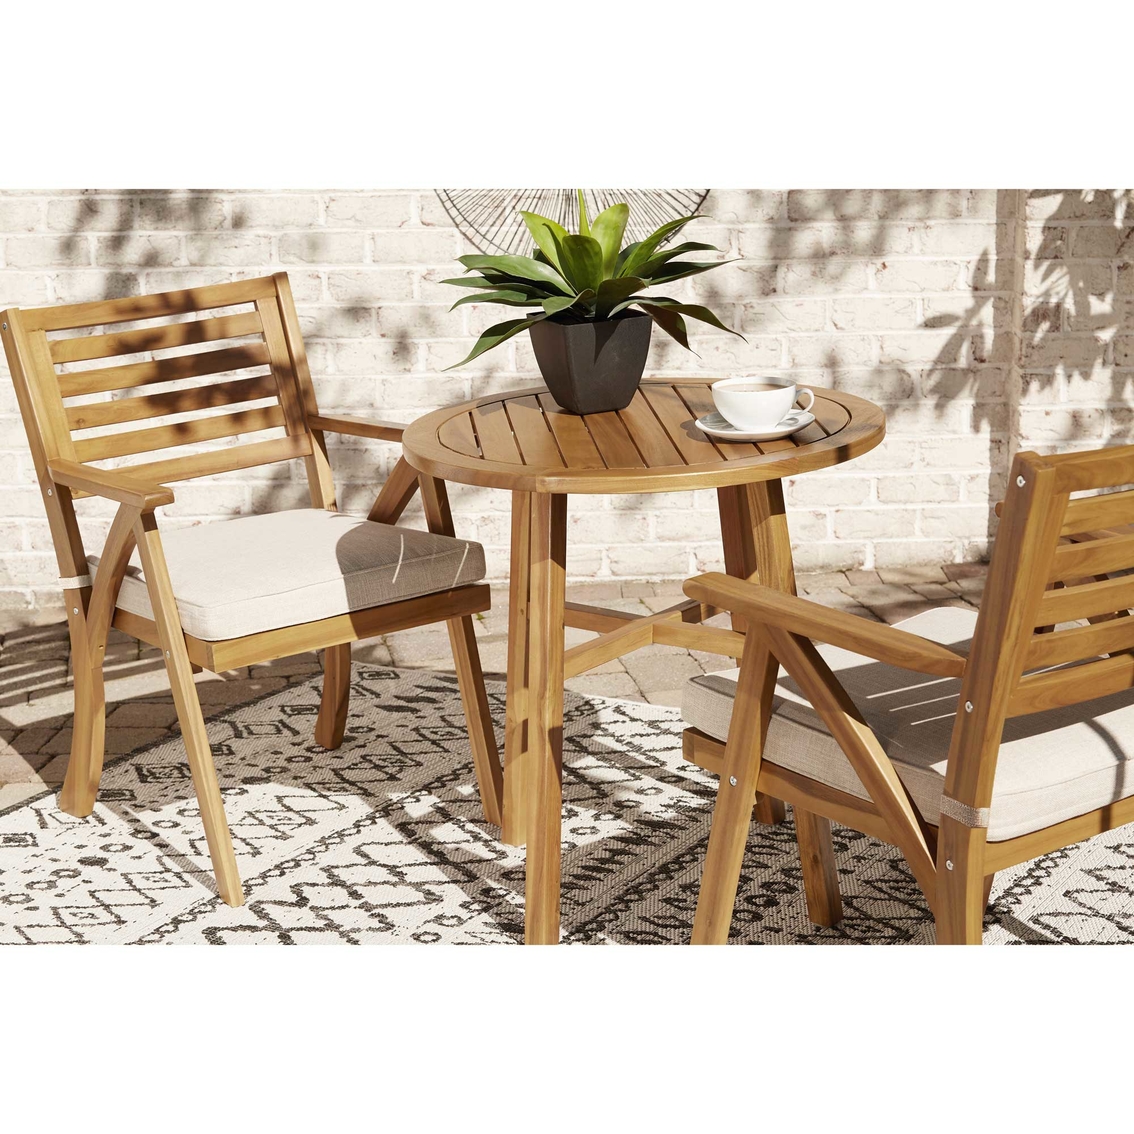 Signature Design by Ashley Vallerie 3 pc. Outdoor Bistro Table Set - Image 6 of 6